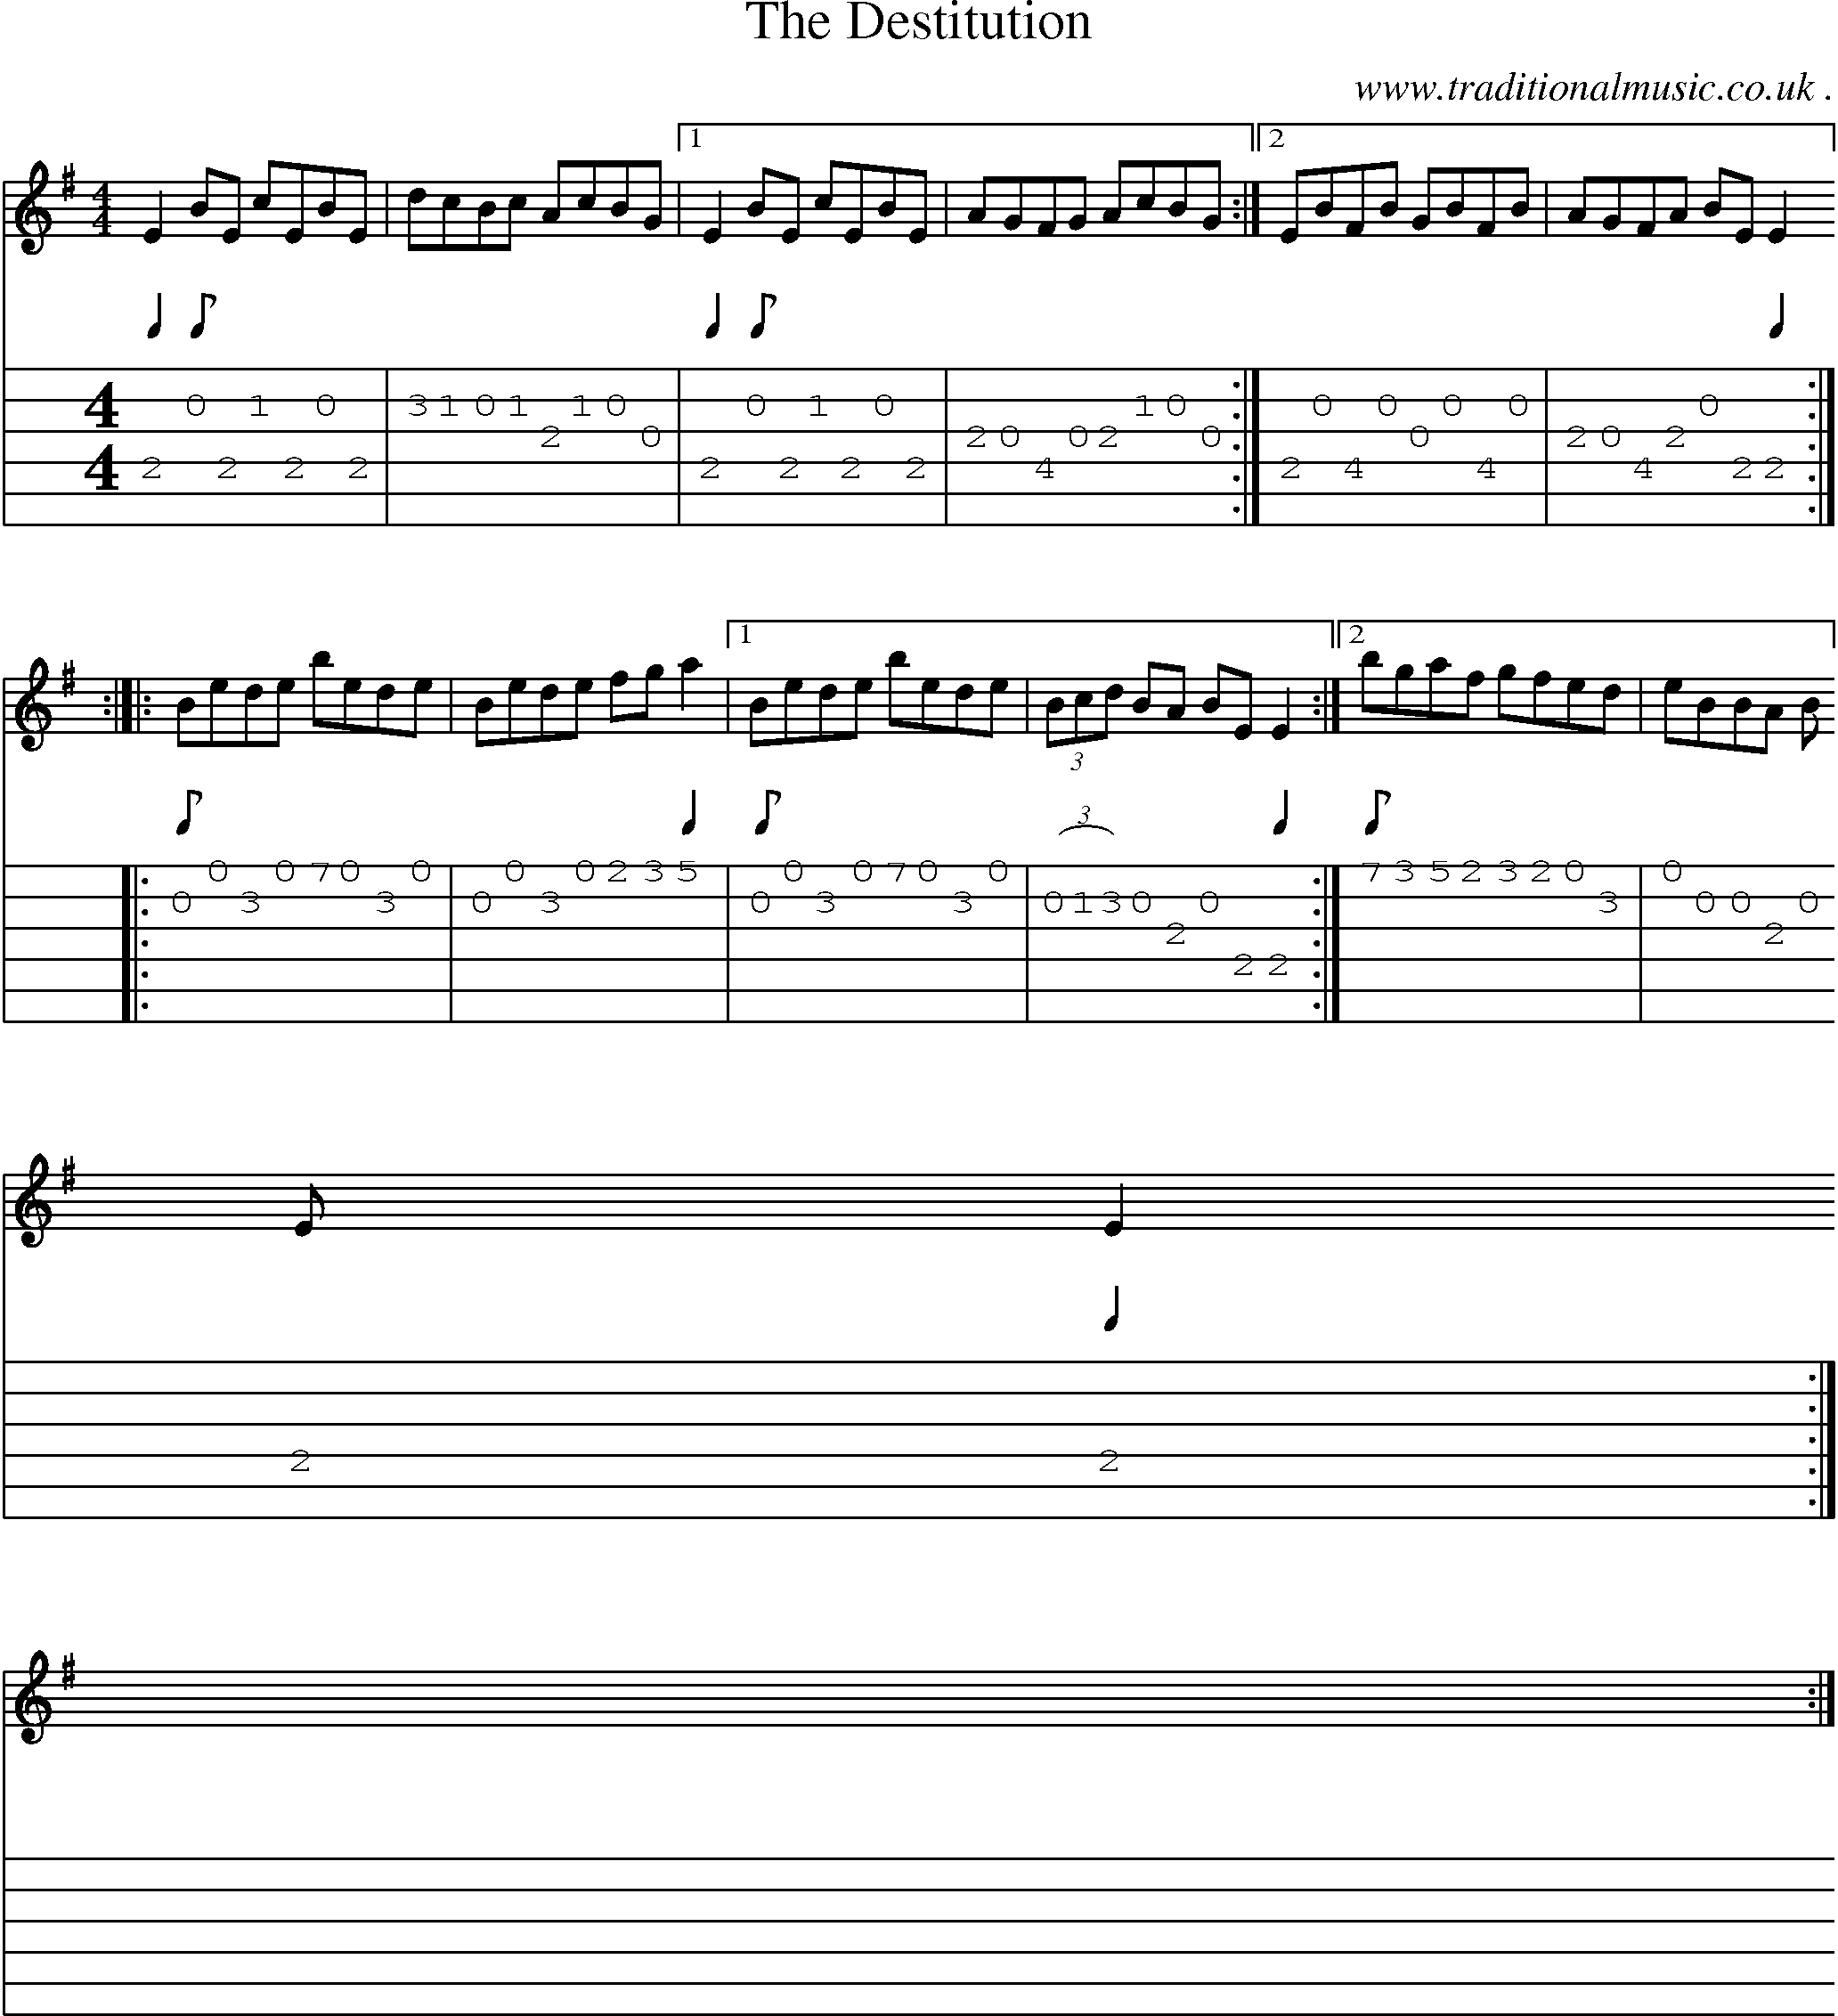 Sheet-Music and Guitar Tabs for The Destitution